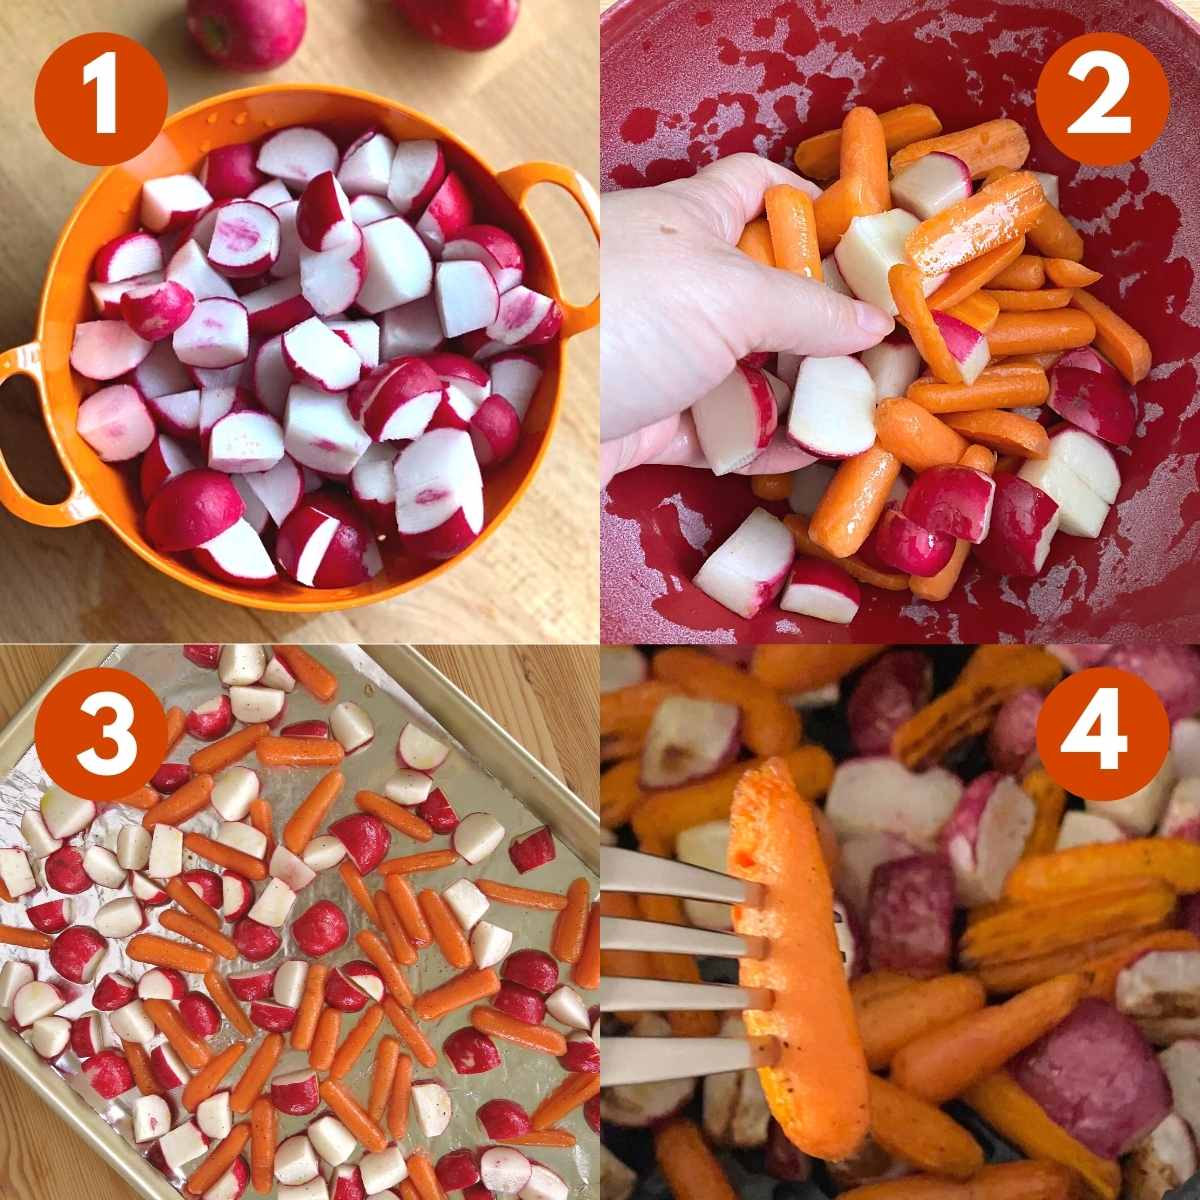 Numbered steps to roast radishes and carrots in the oven. 1) raw radishes in strainer 2) hand tossing carrots and radishes with olive oil, salt and pepper, 3) vegetables on a large baking sheet, 4) fork holding up a single roasted carrot.